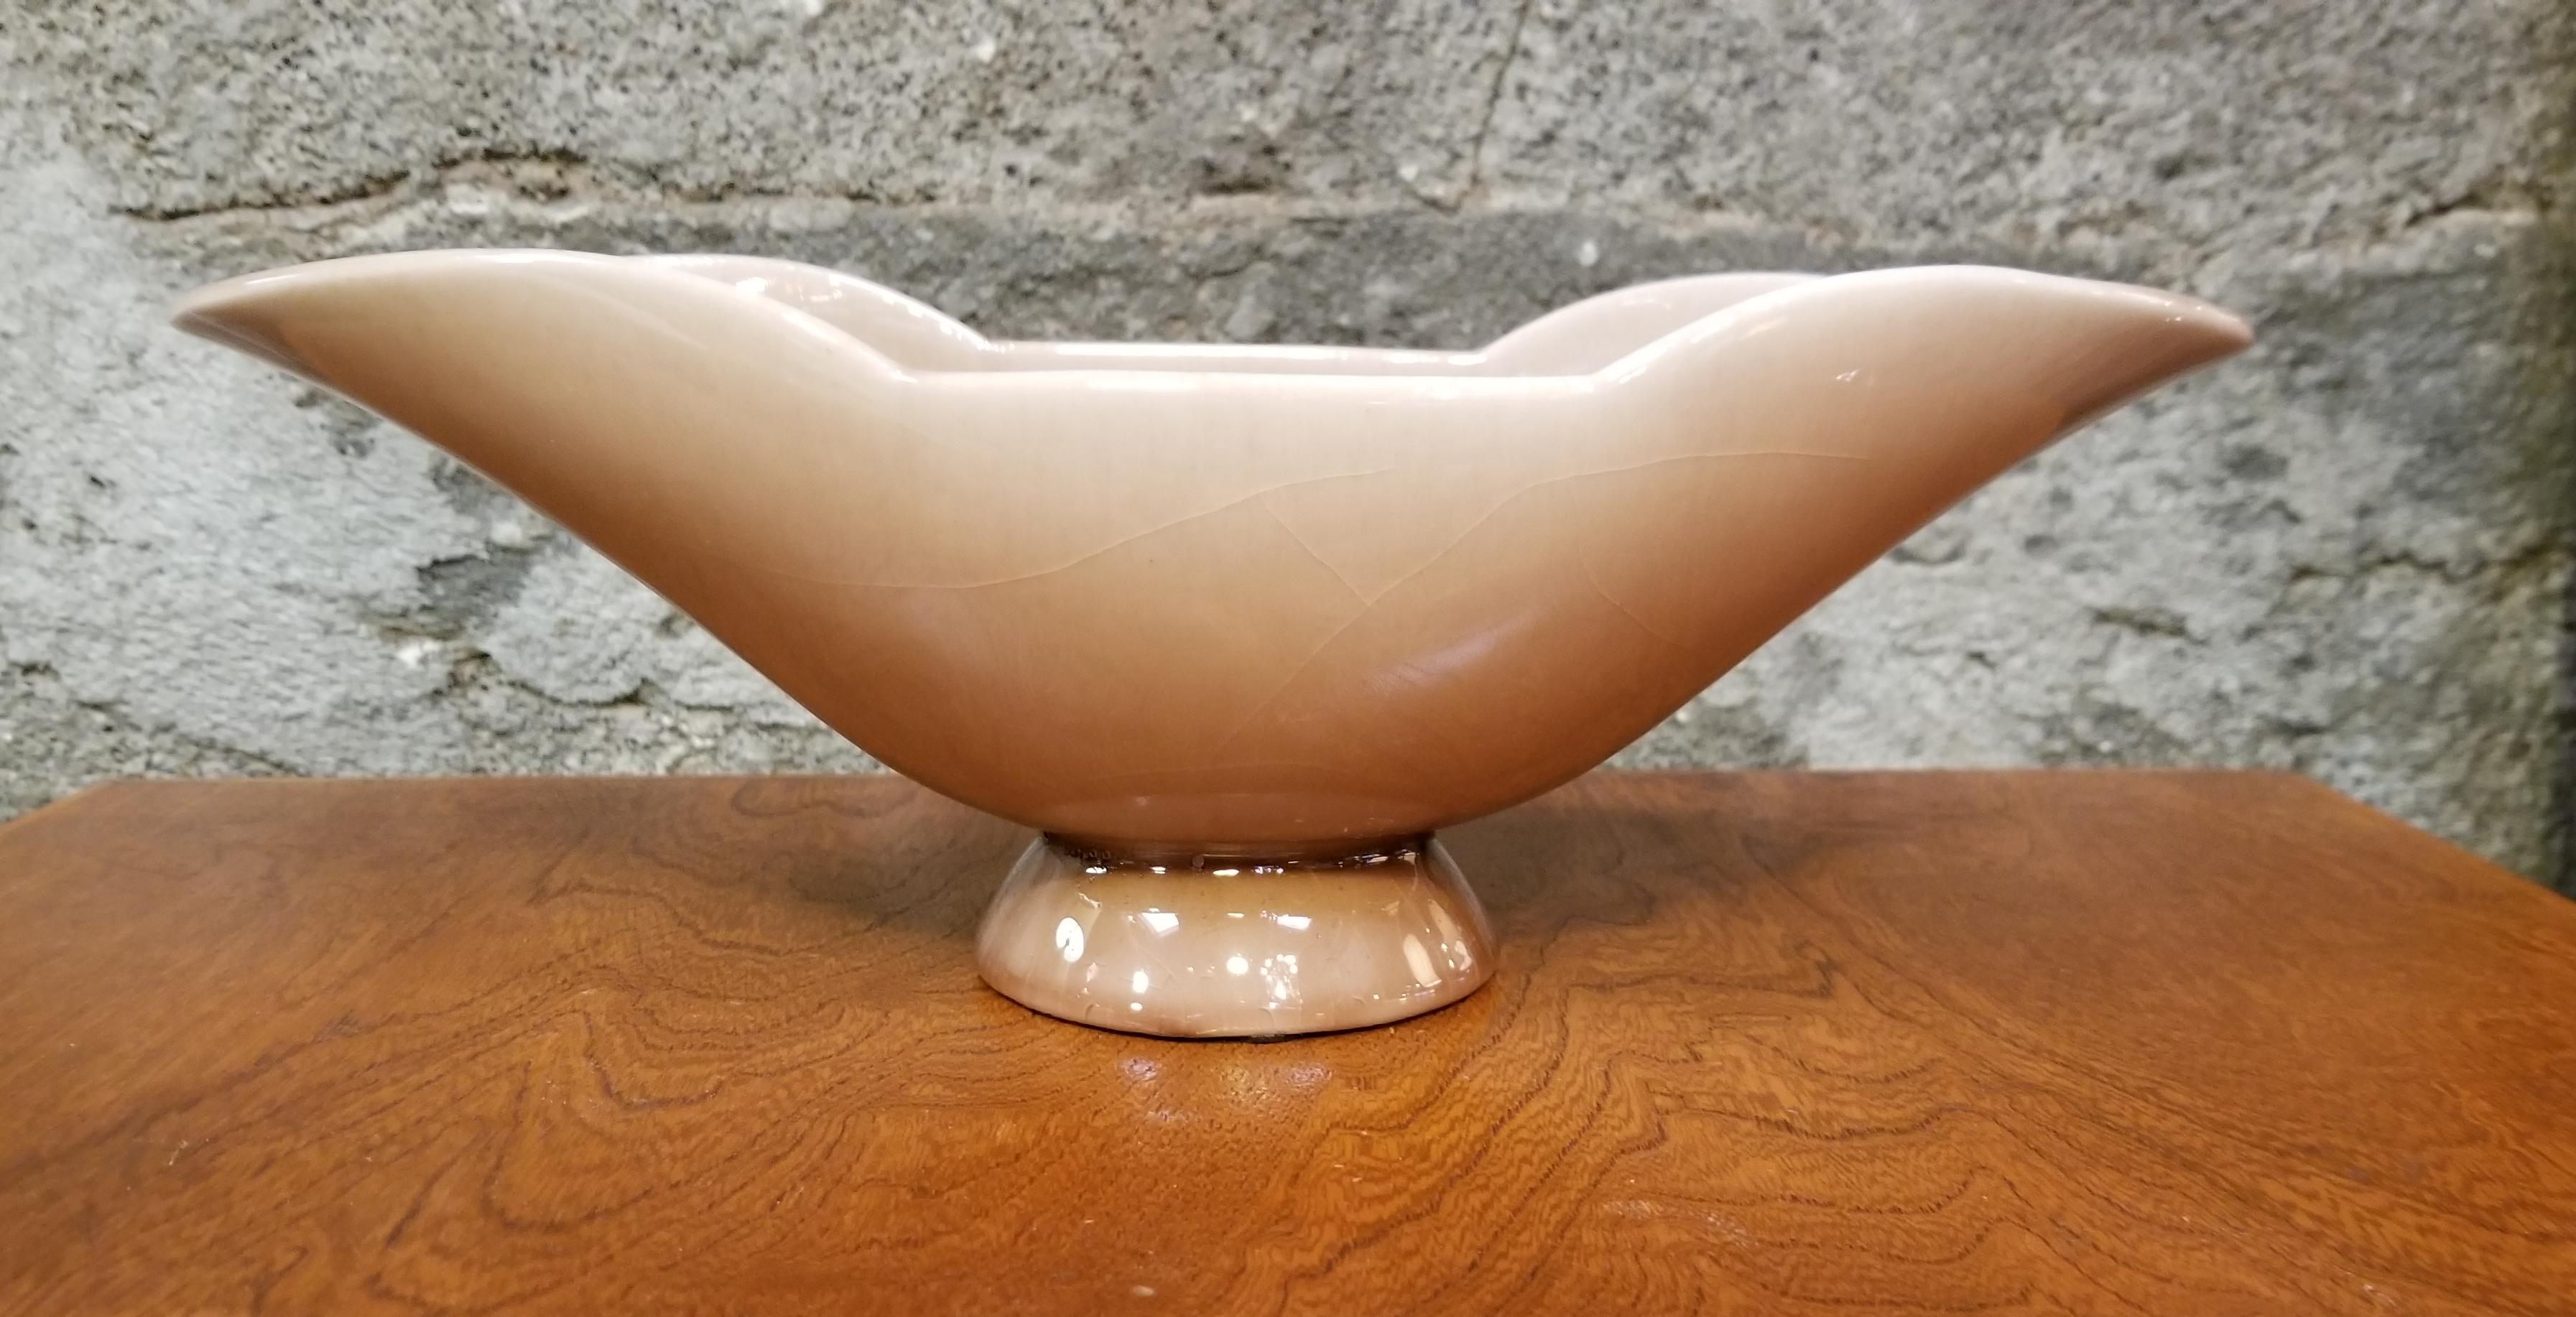 Art pottery ceramic center bowl or vase by Rookwood Pottery Company, dated 1946. Signed and dated on base.

Rookwood Pottery Company:

Rookwood Pottery is known for having many women artists on staff over its long lifespan. It has the